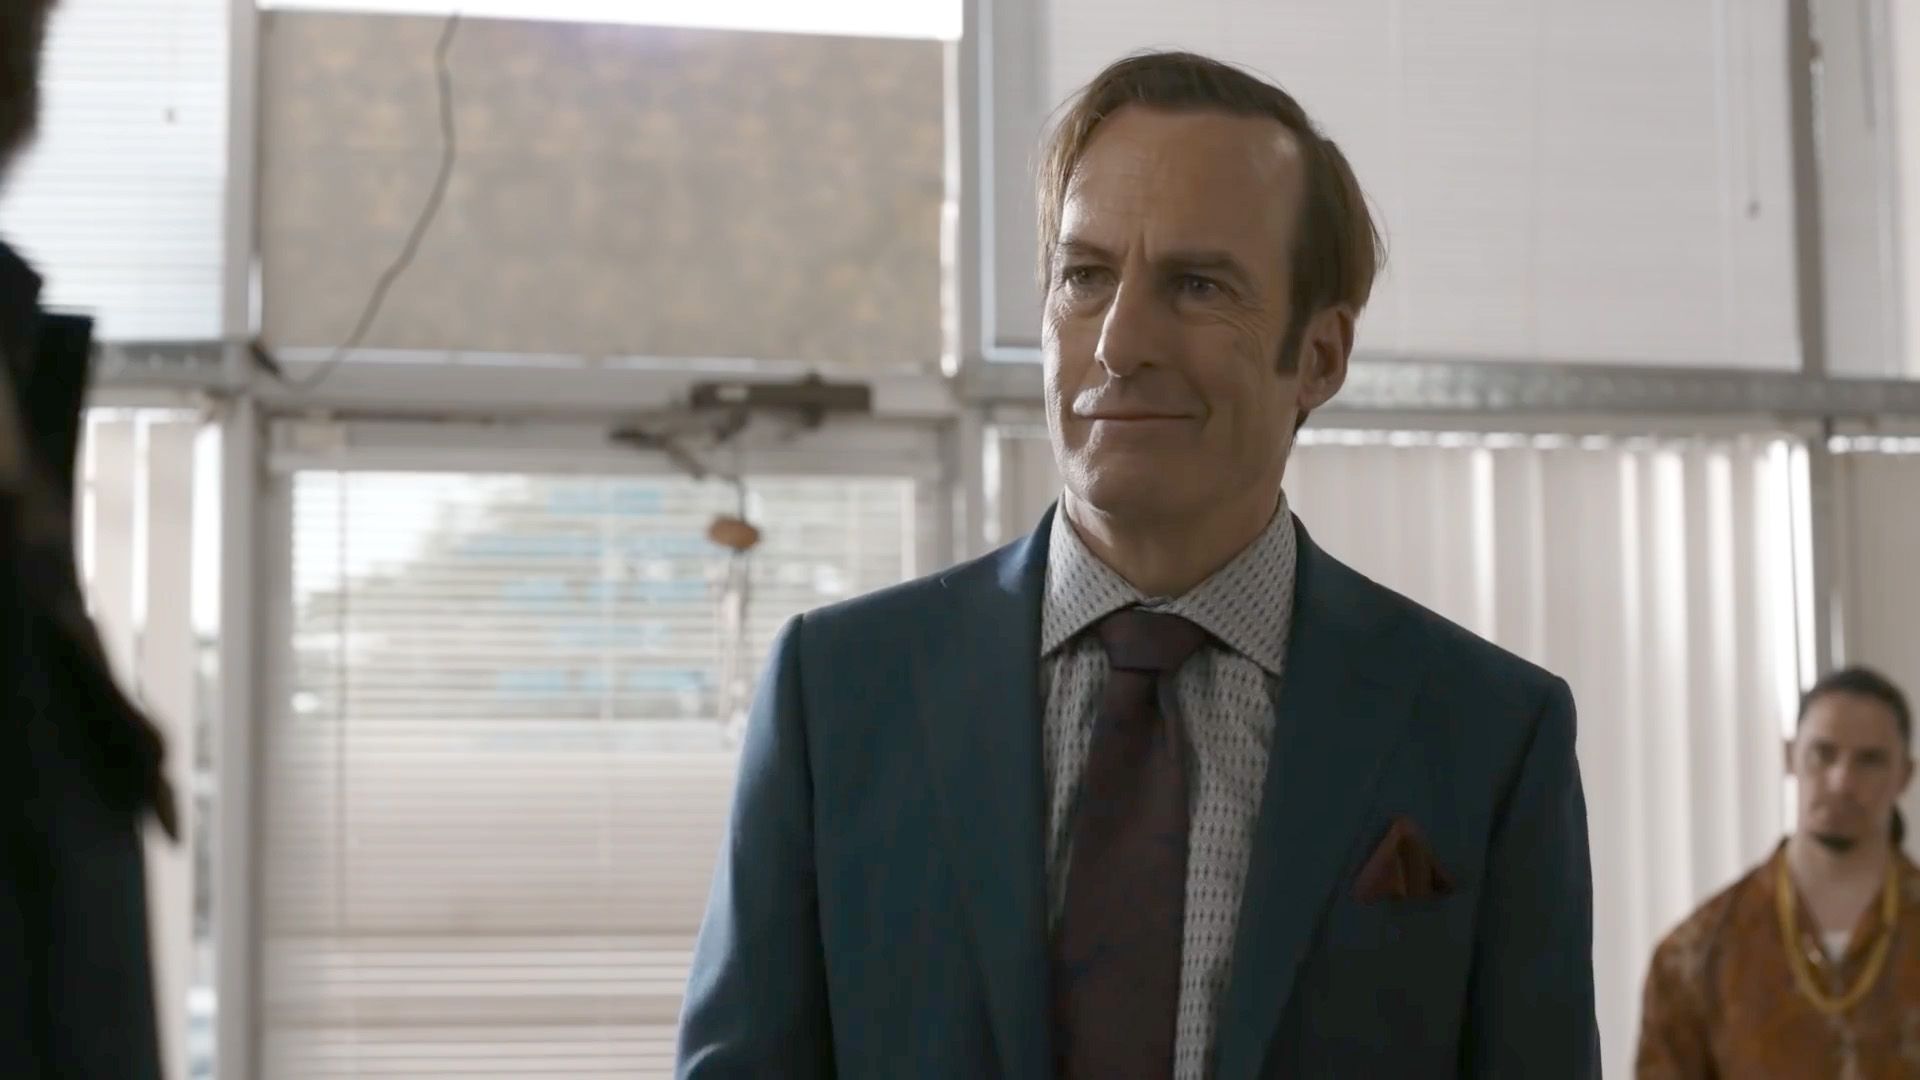 Better Call Saul final season: 'Better Call Saul' season 6 delayed due to  Covid-19, 'unlikely' to start production in 2020 - The Economic Times